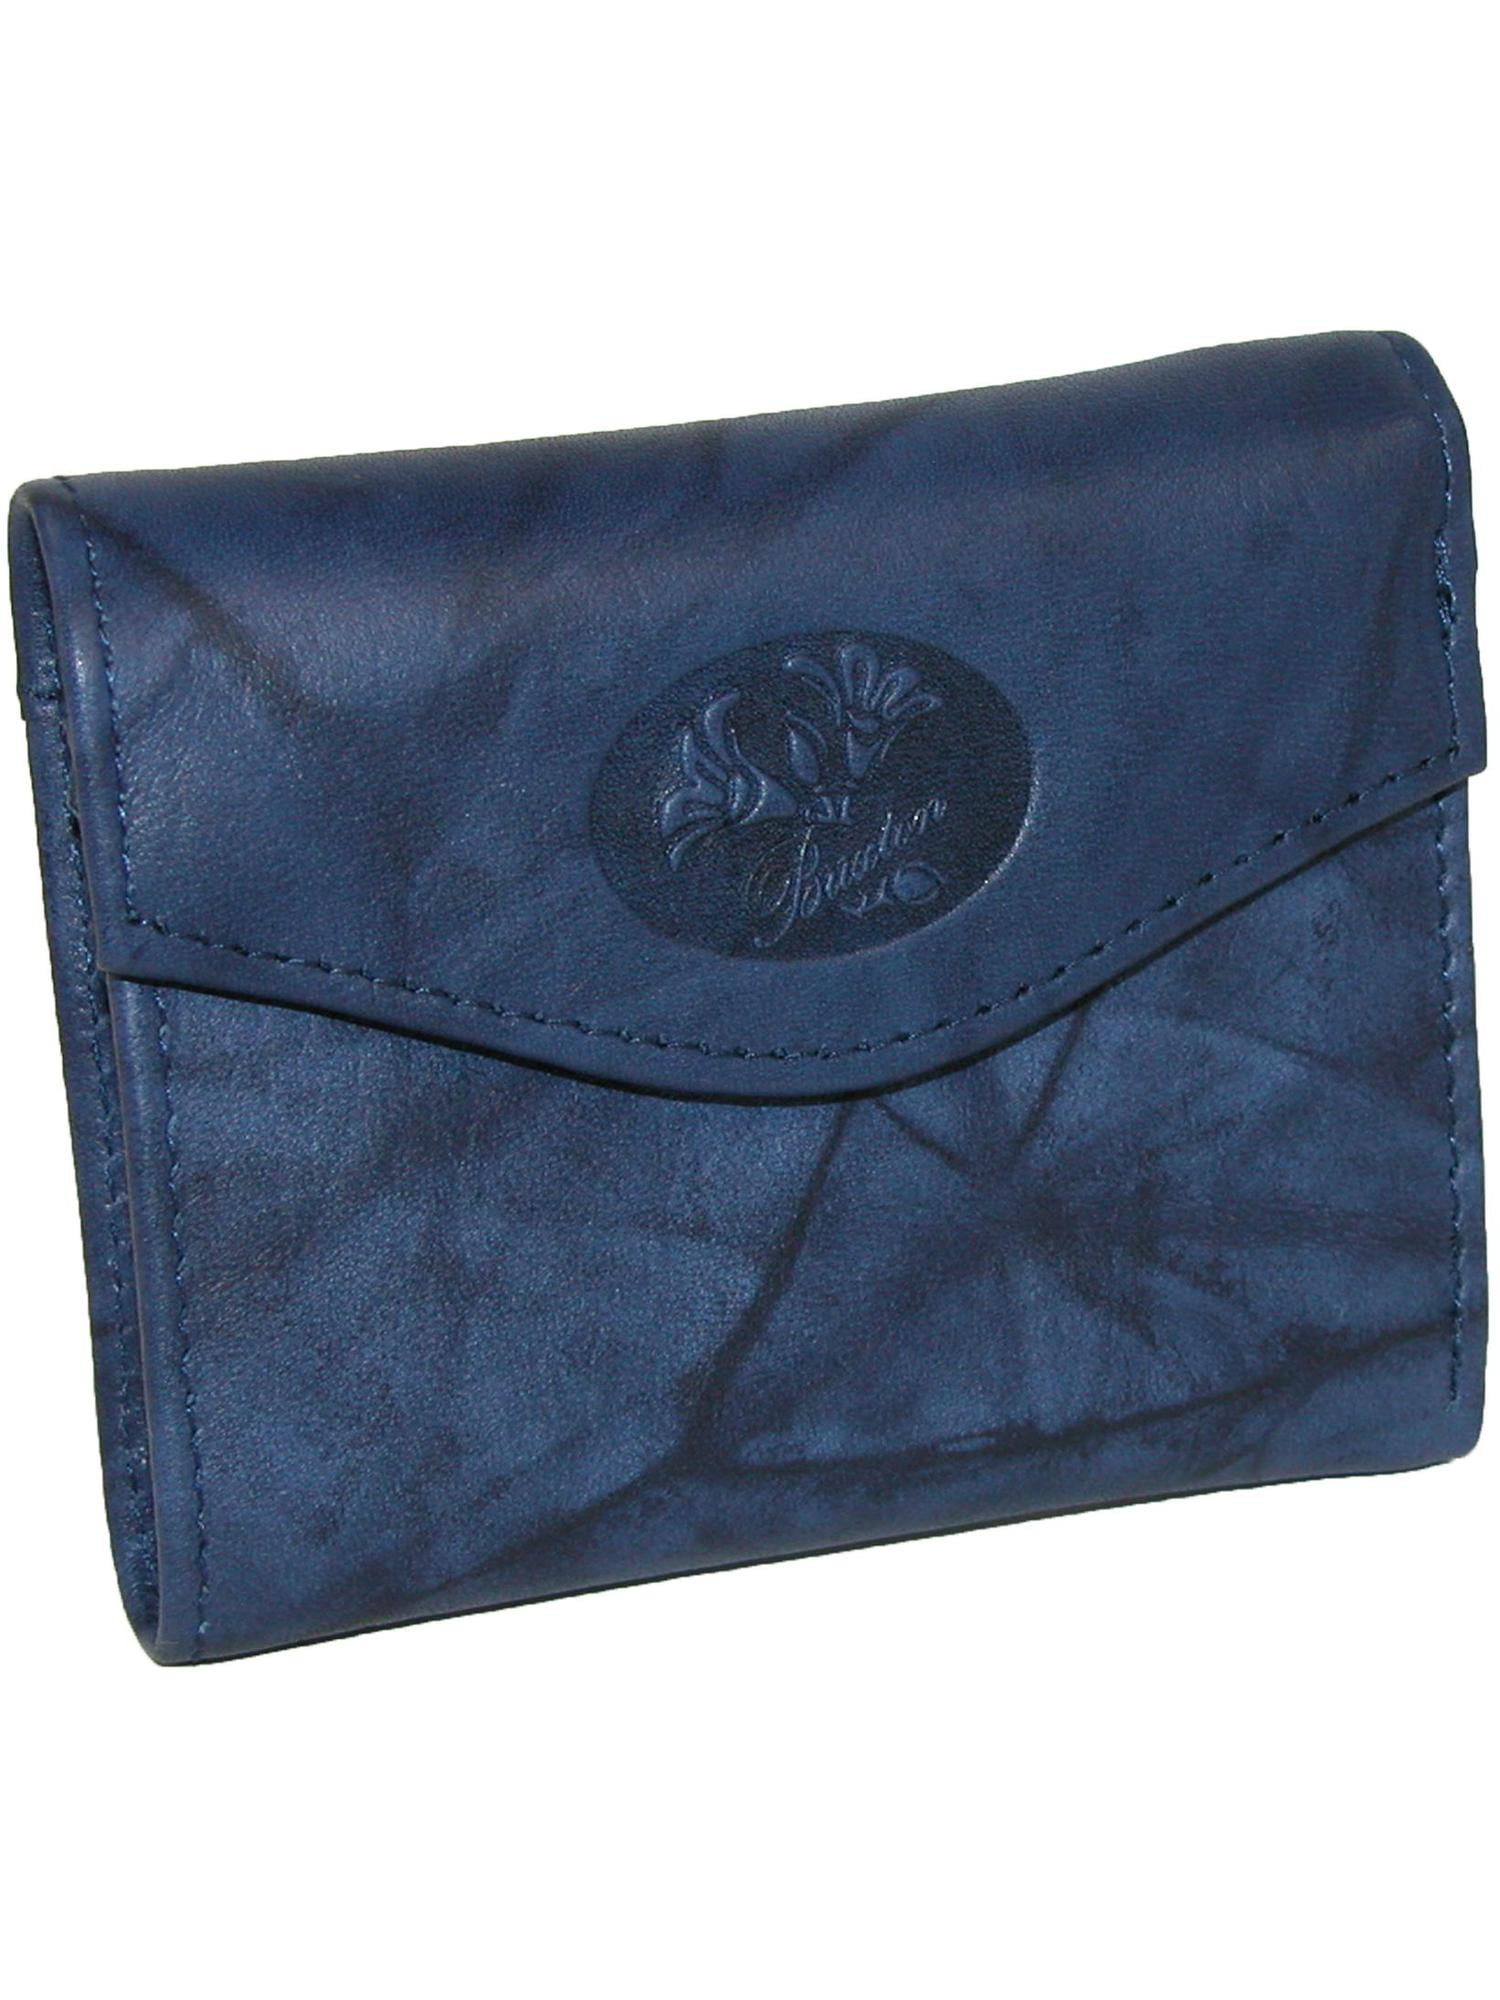 Buxton Leather Mini Trifold Wallet with Floral Emboss (Women's